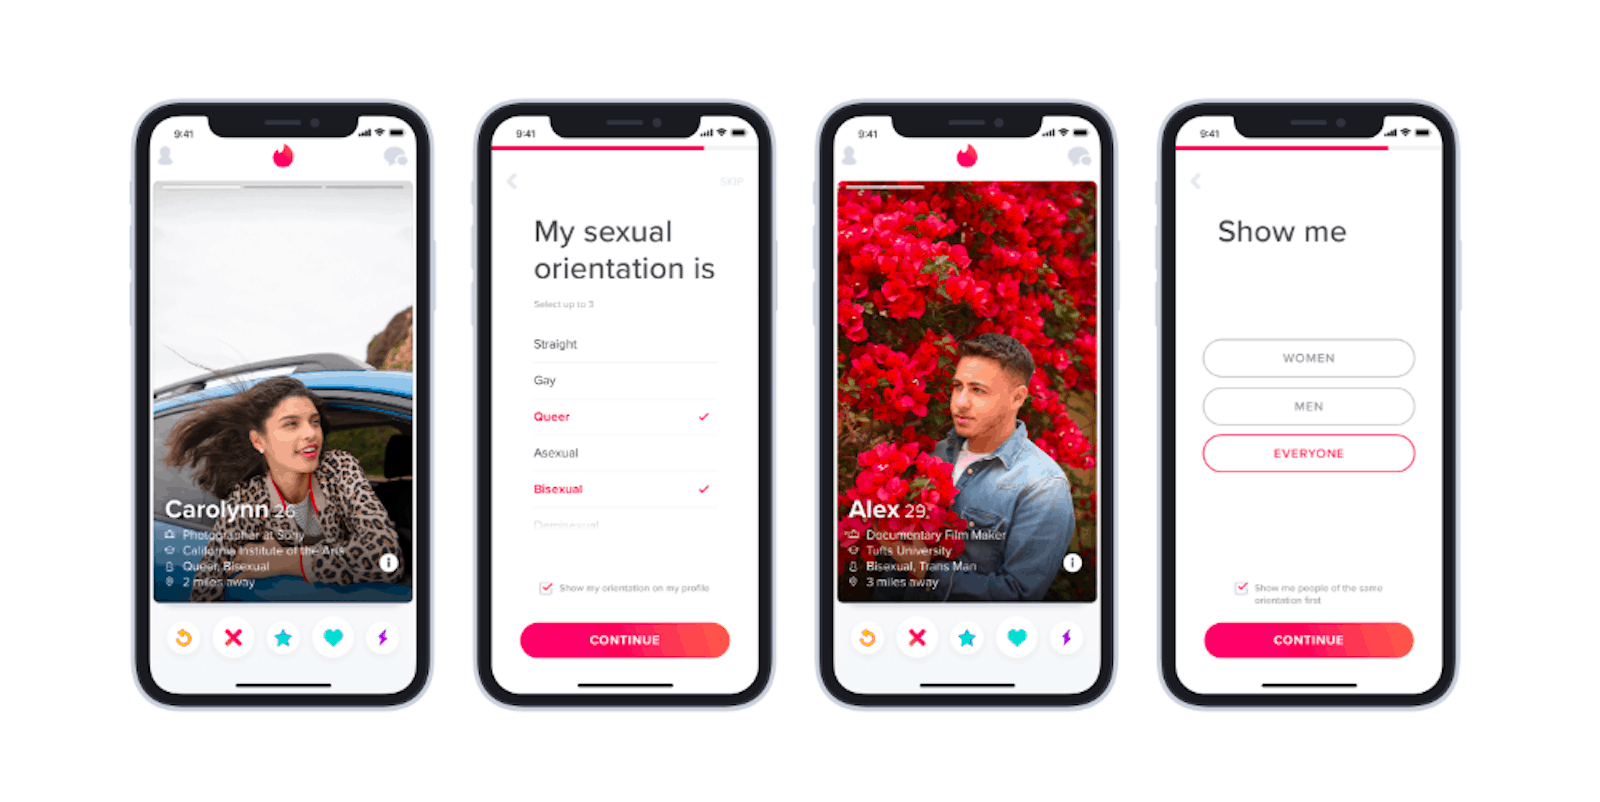 Tinder rolls out sexual orientation option, while continuing to ban trans people